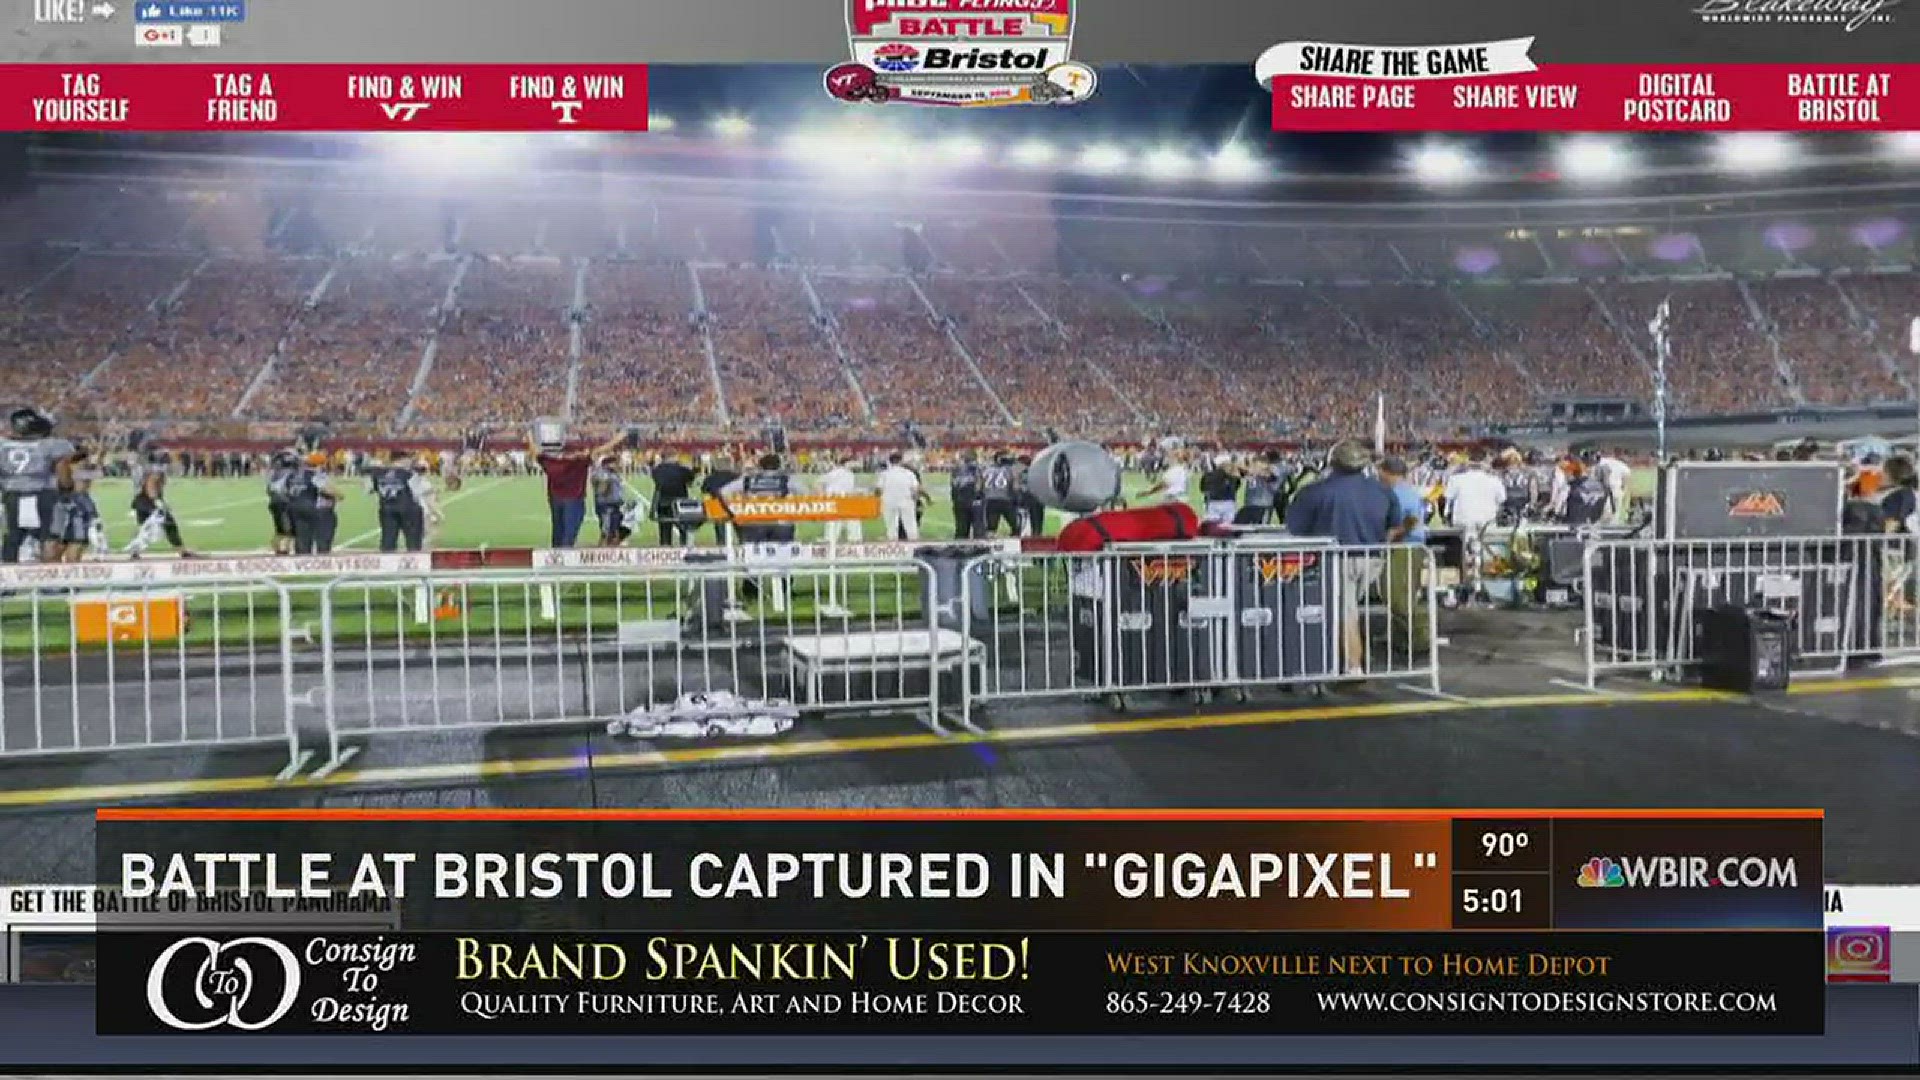 A high-resolution 360-degree gigapixel photo taken at Bristol Motor Speedway is letting people search for themselves in the crowd.